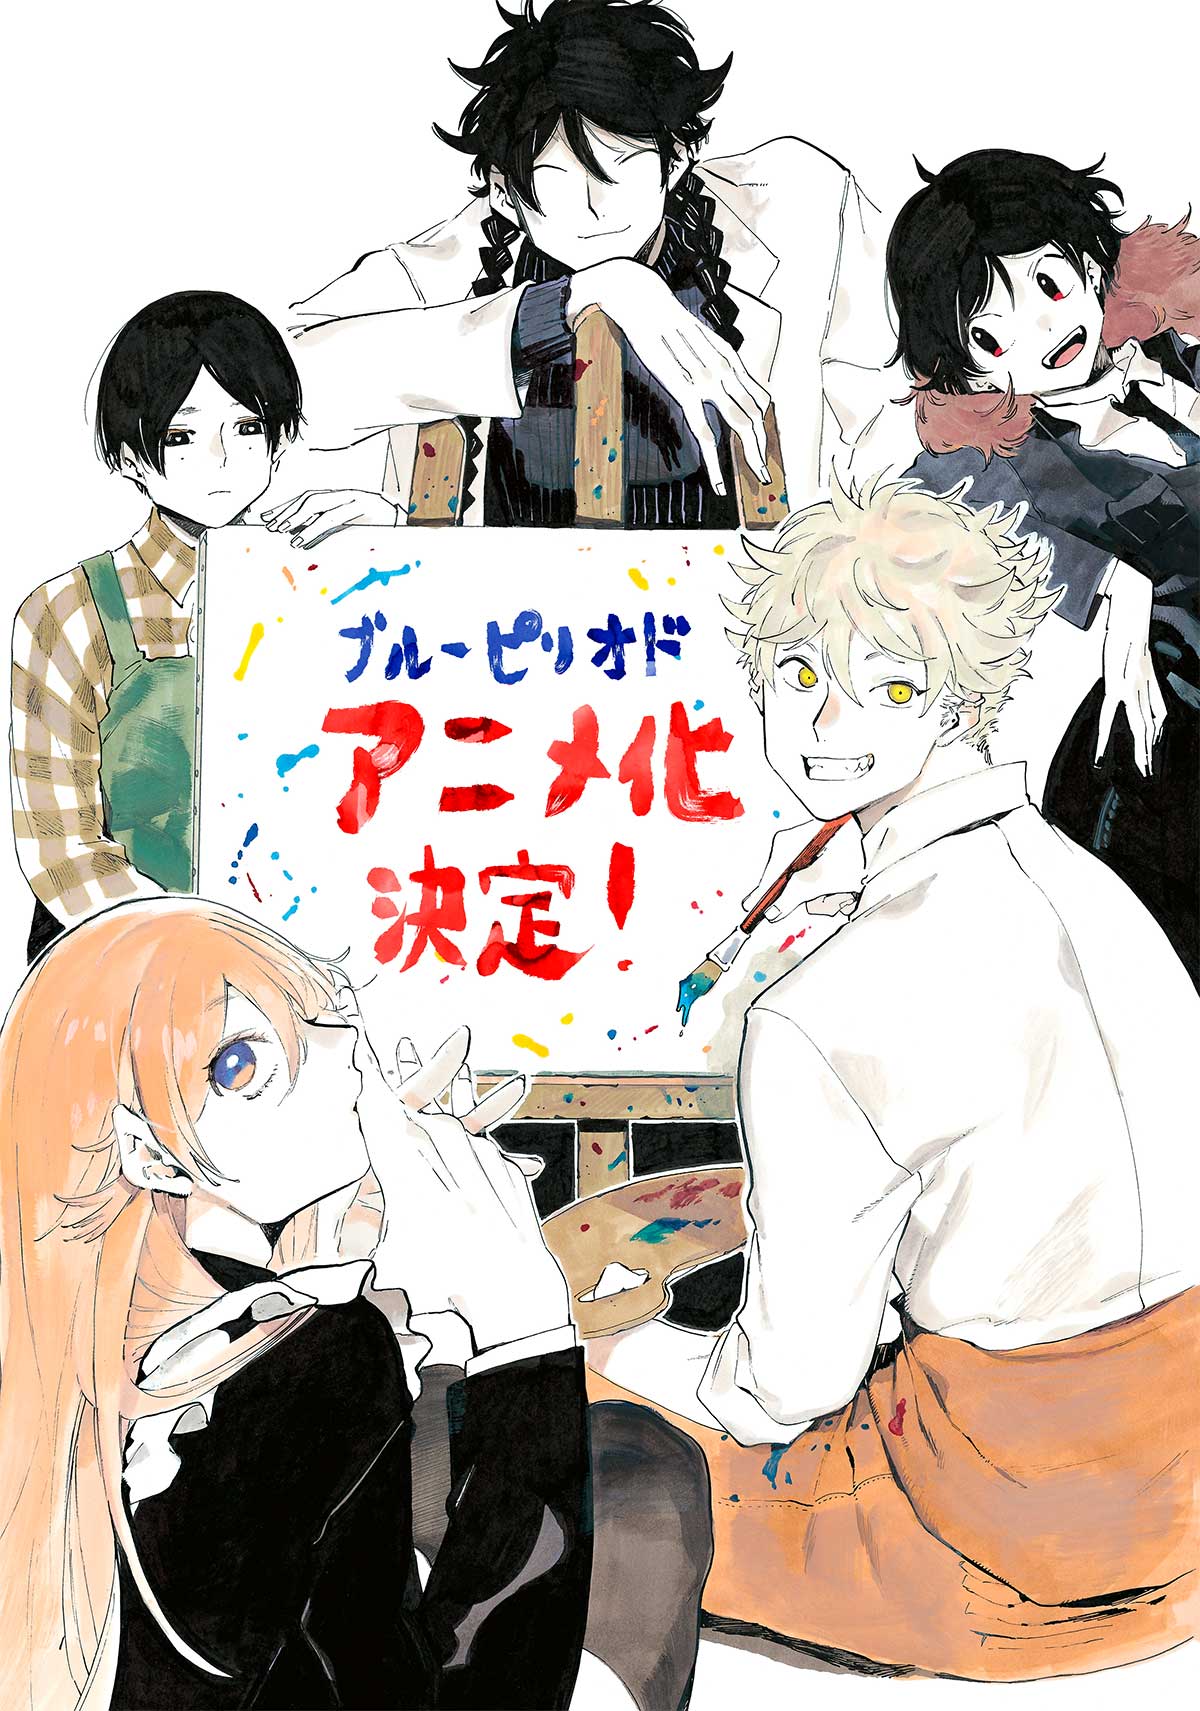 Blue Period, Manga About Passion For Art, Announces Anime Series